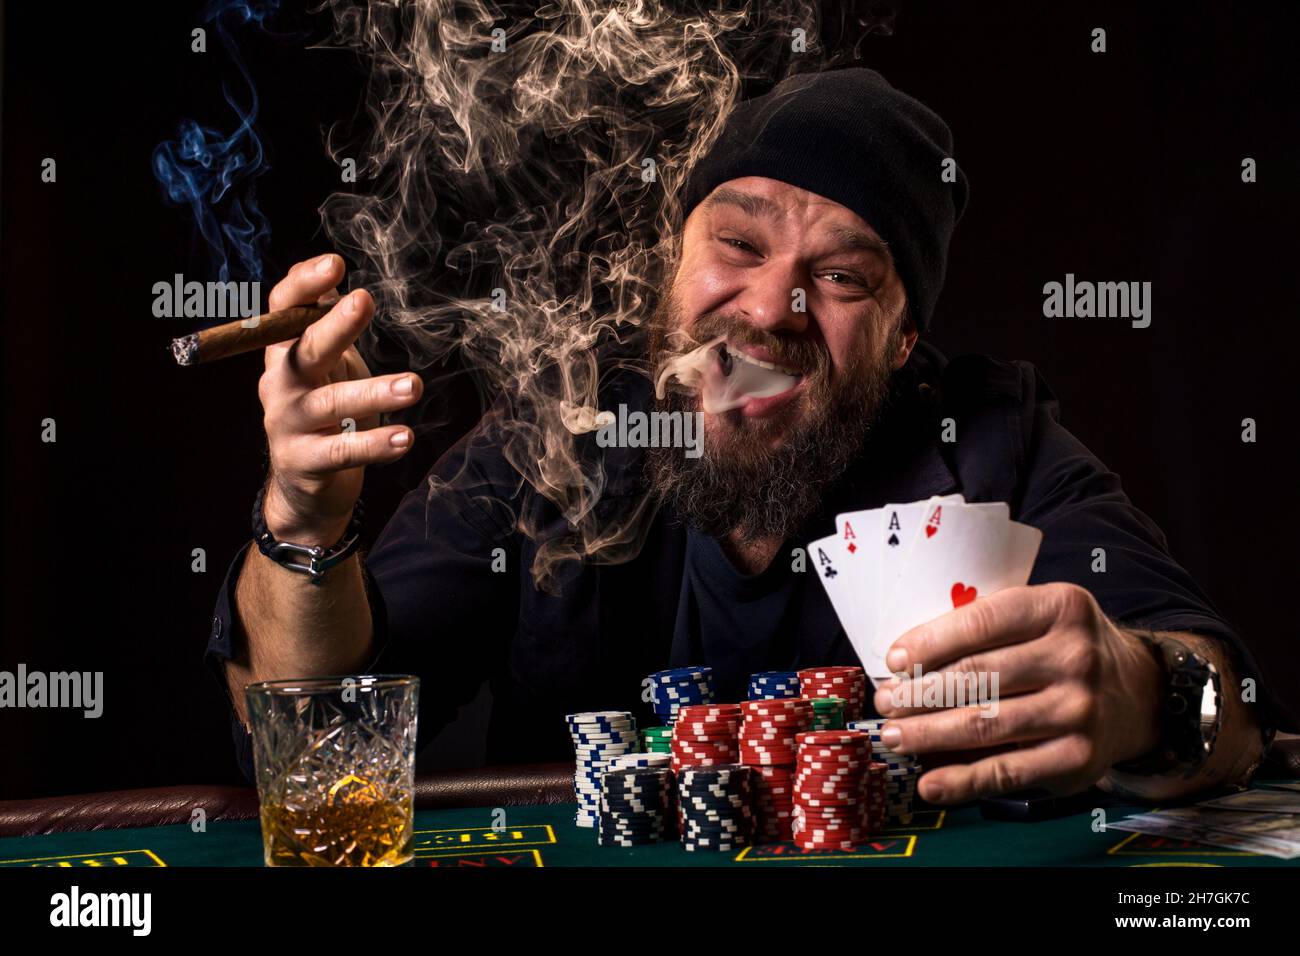 Bearded man drinking whisky and smoking a cigar while playing poker Stock Photo